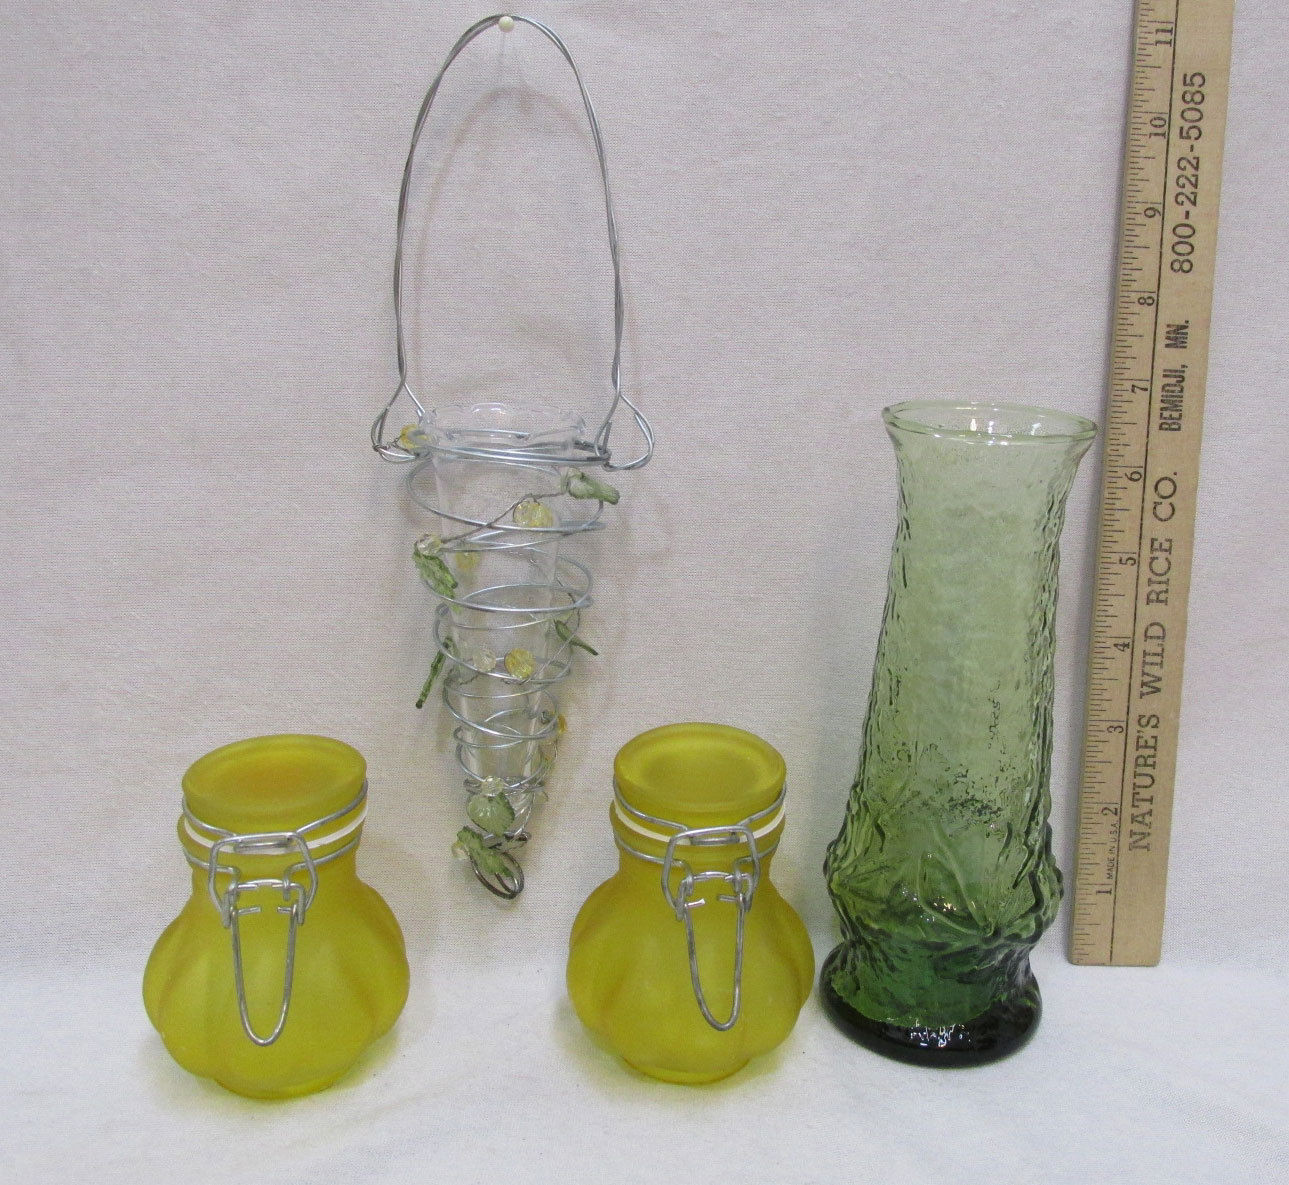 low cost glass vases of hanging bud vase glass jars green yellow and 50 similar items in hanging bud vase glass jars green yellow shade leaf bead charms floral lot of 4